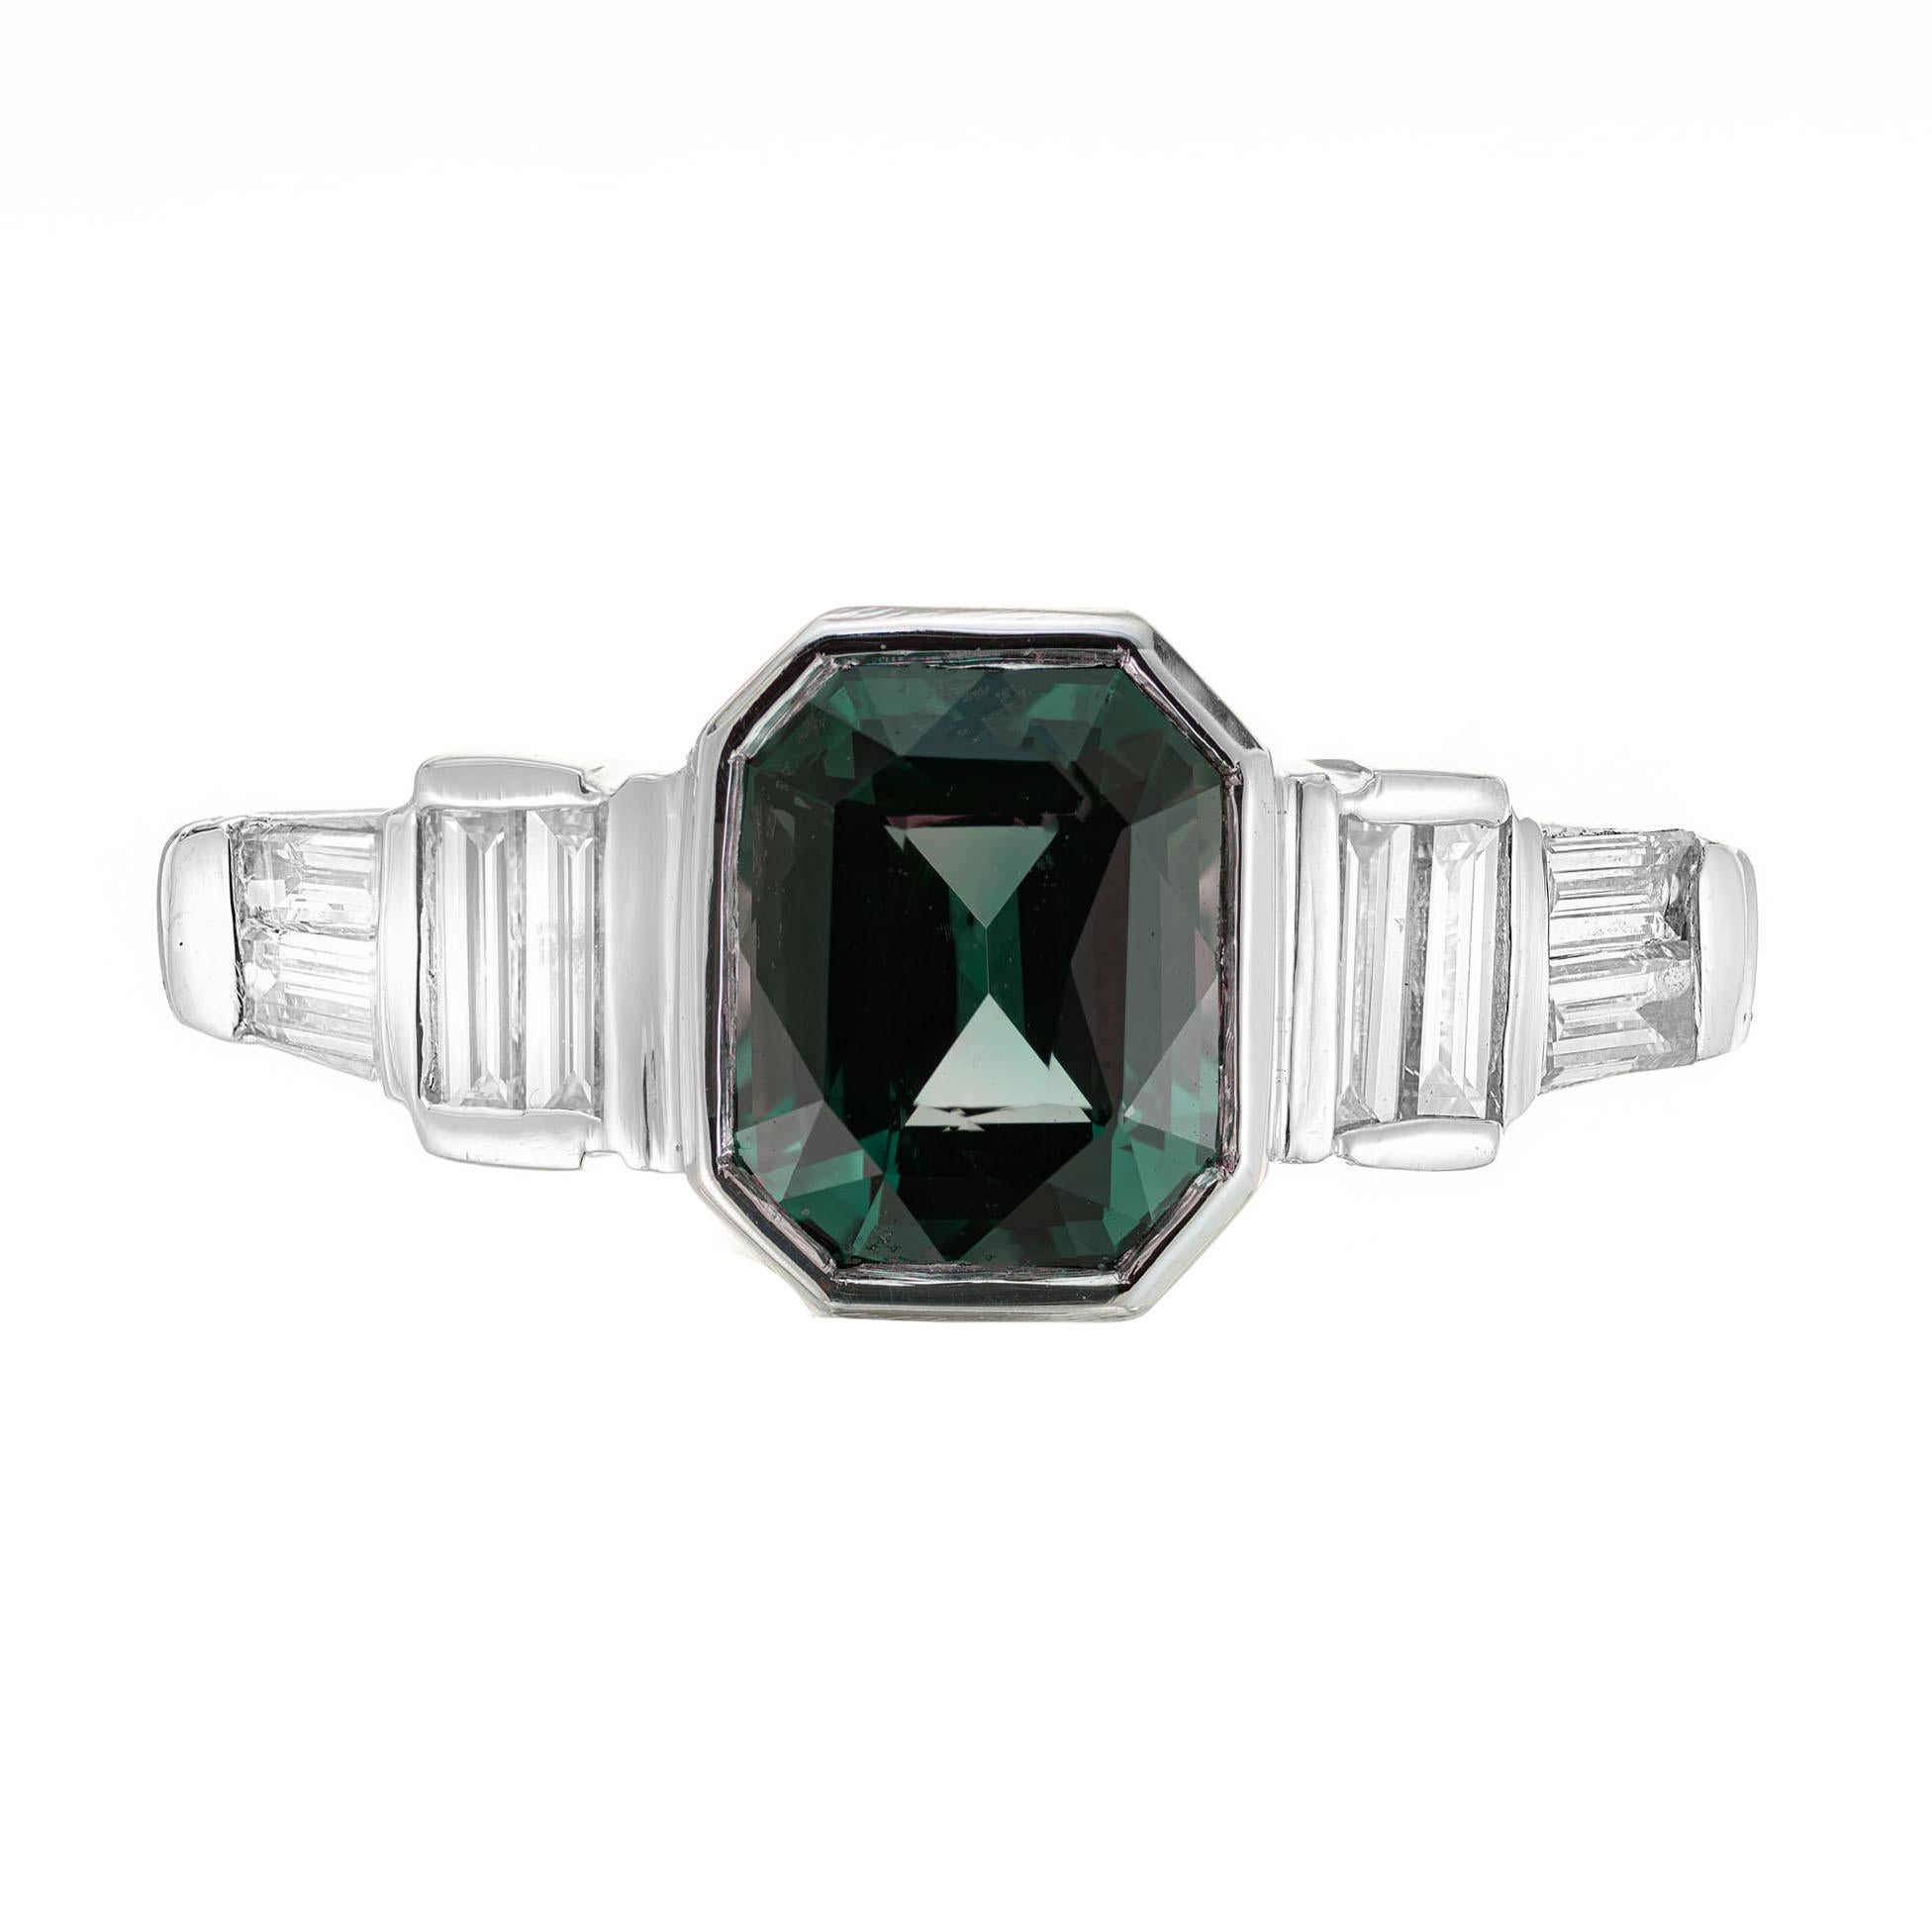 Octagonal Art Deco step emerald step cut sapphire and diamond engagement ring. GIA certified as natural no heat , no enhancements green blue center octagonal center 2.30ct sapphire with 8 baguette cut accent diamonds in a platinum setting. The